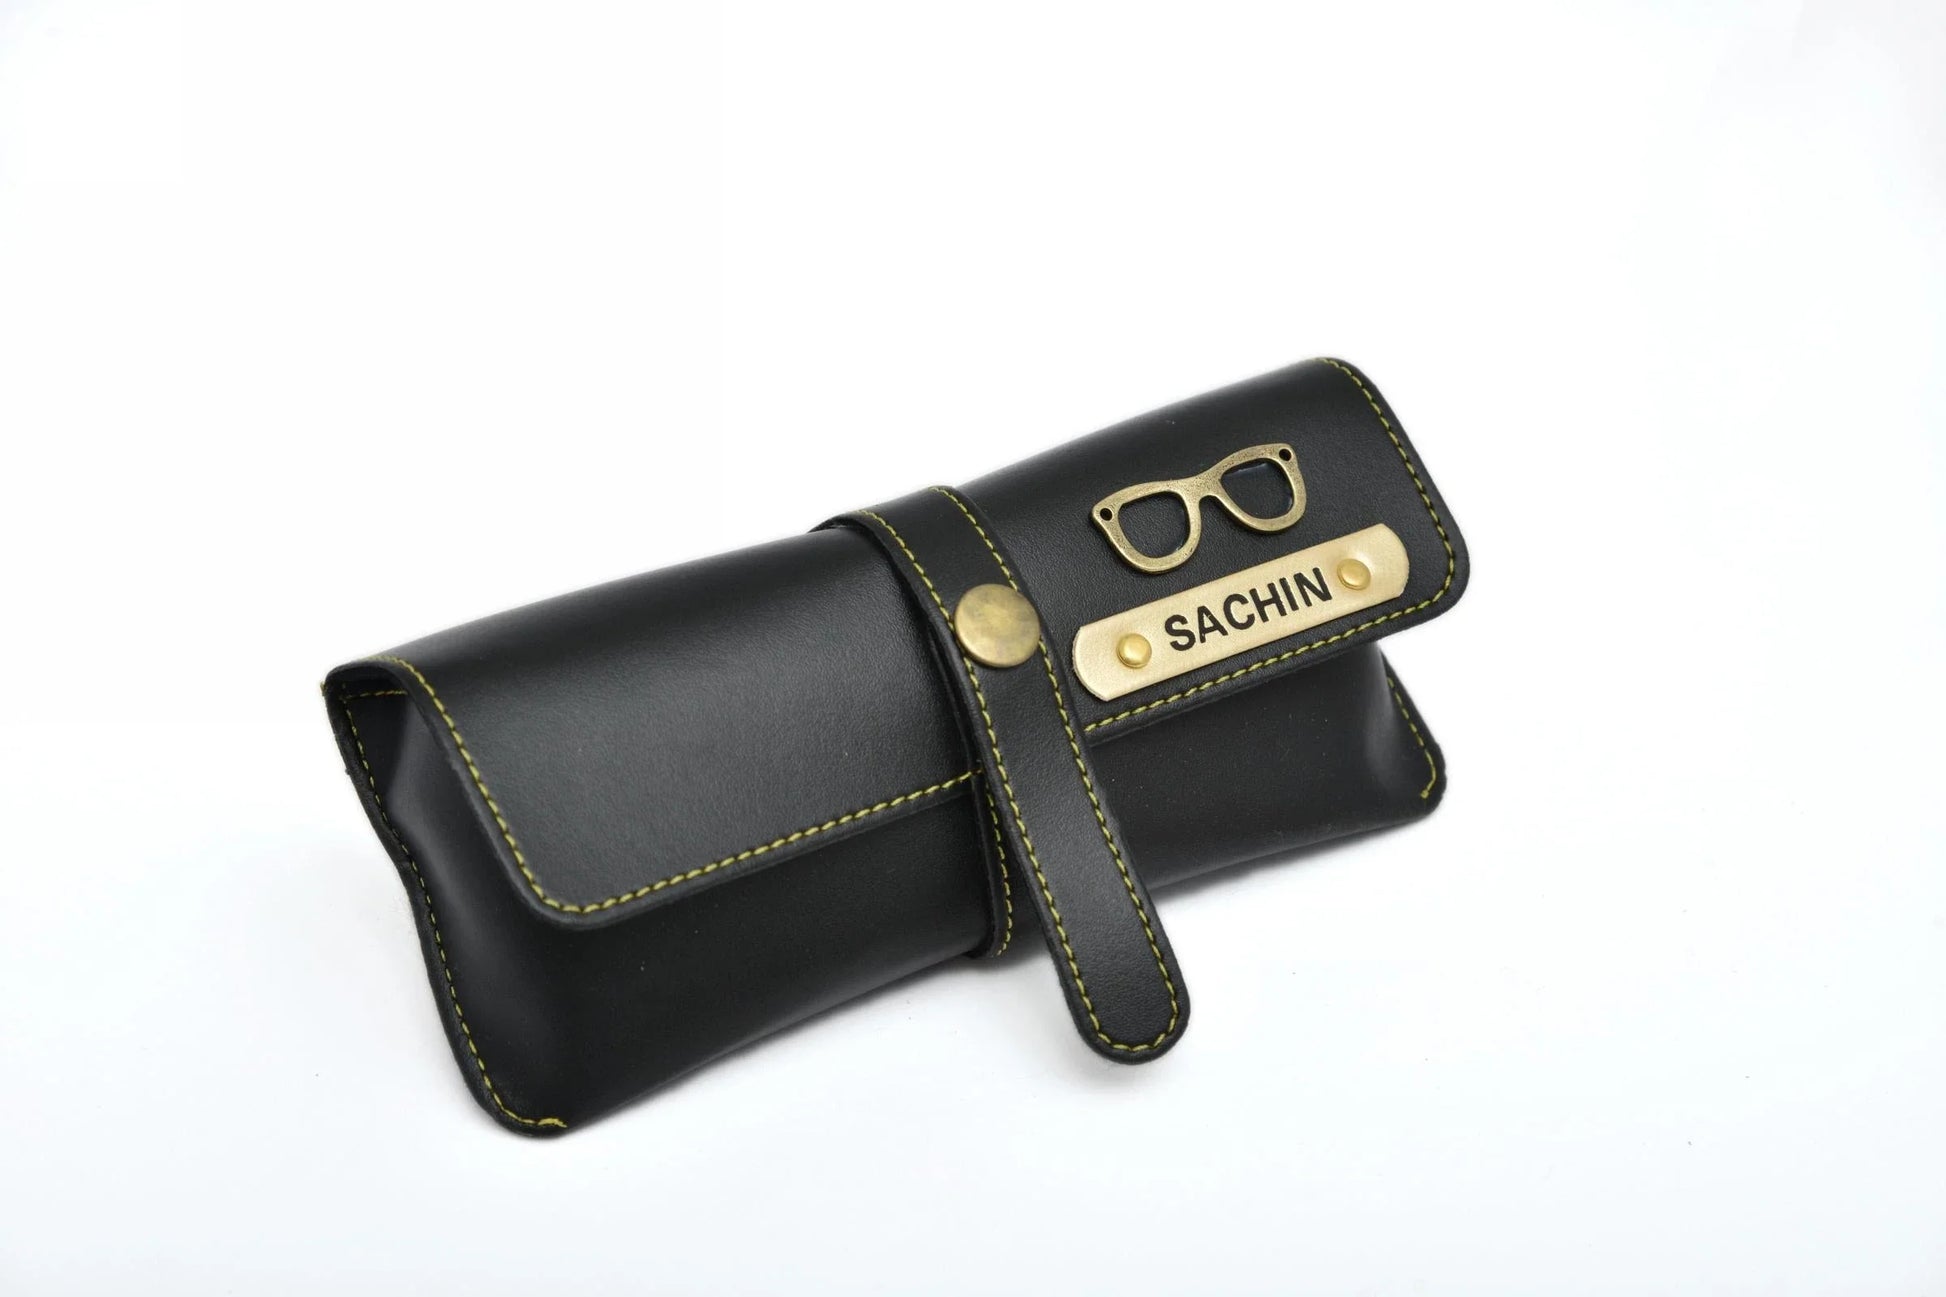 personalized-cb03-black-customized-best-gift-for-boyfriend-girlfriend.So, protect your eyewear too and make it look modern by getting your very own classy, personalized unisex leather glass case.  Add your name and charm to your favourite coloured eyewear case and live in style!   With a royal leathery finish and a top-notch material quality, these personalized unisex glass cases prove to be sturdy while looking stylish. They protect your eyewear from all sorts of stresses!